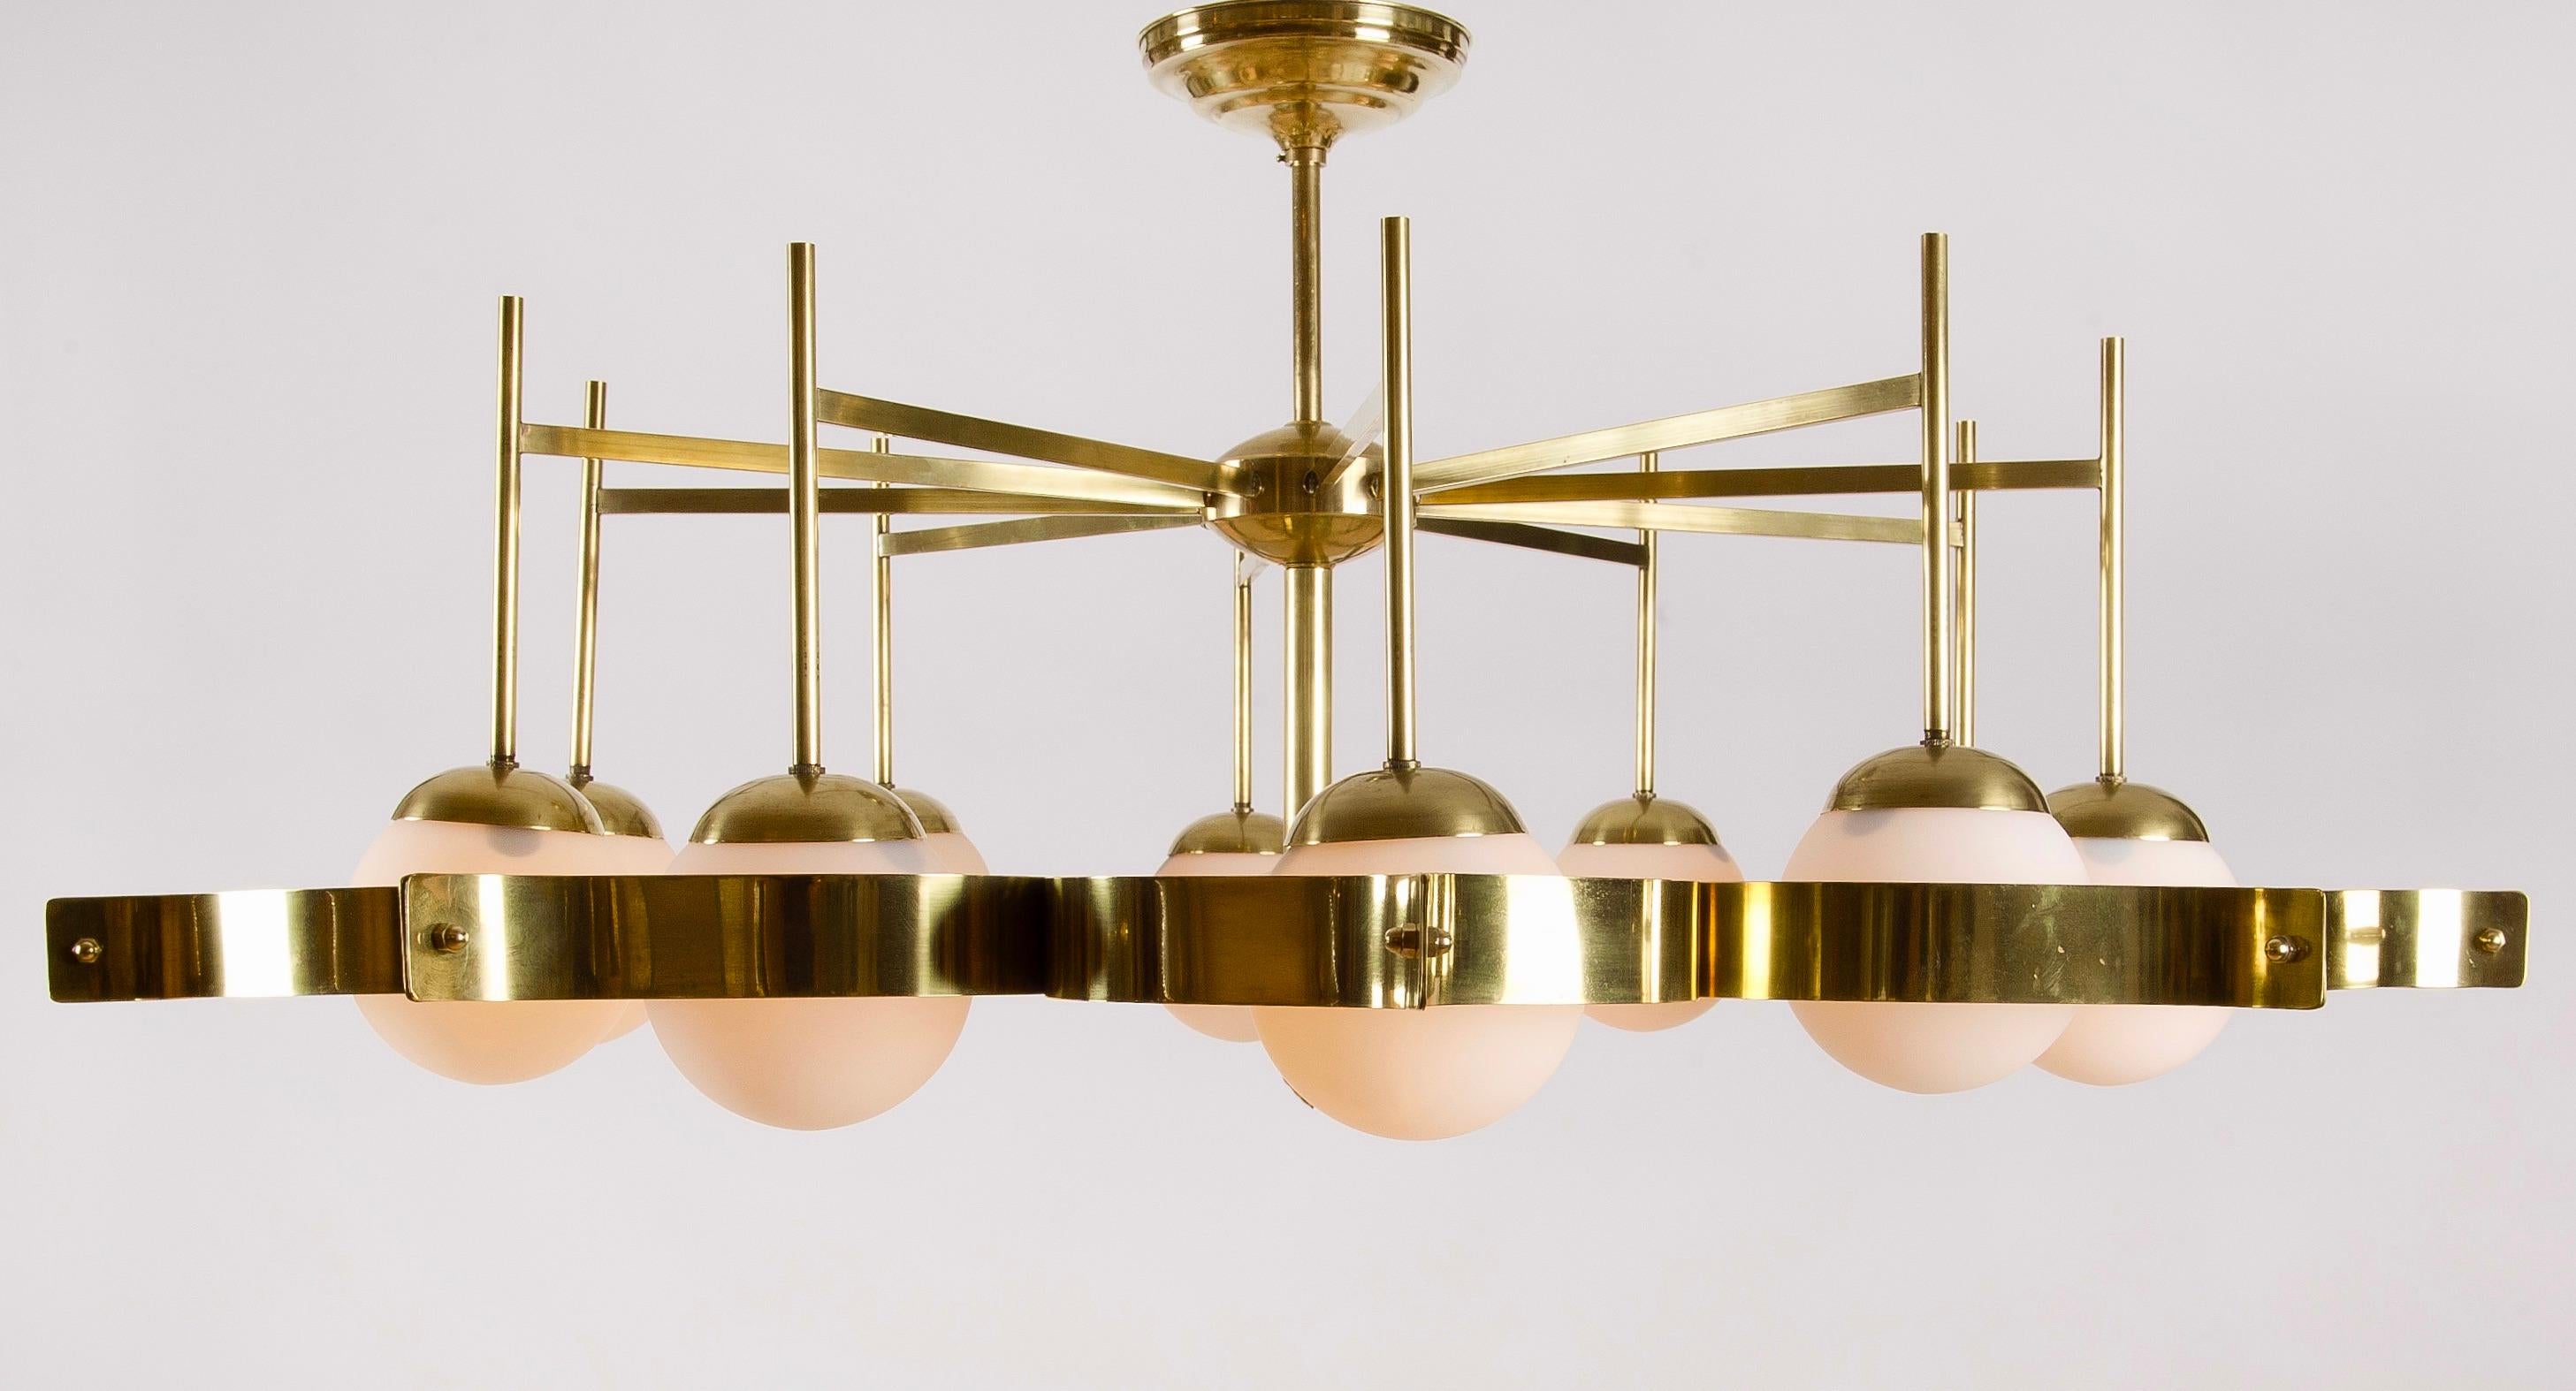 Italian Brass and Opaline Glass Ceiling Light in the Manner of Gio Ponti for Arredoluce